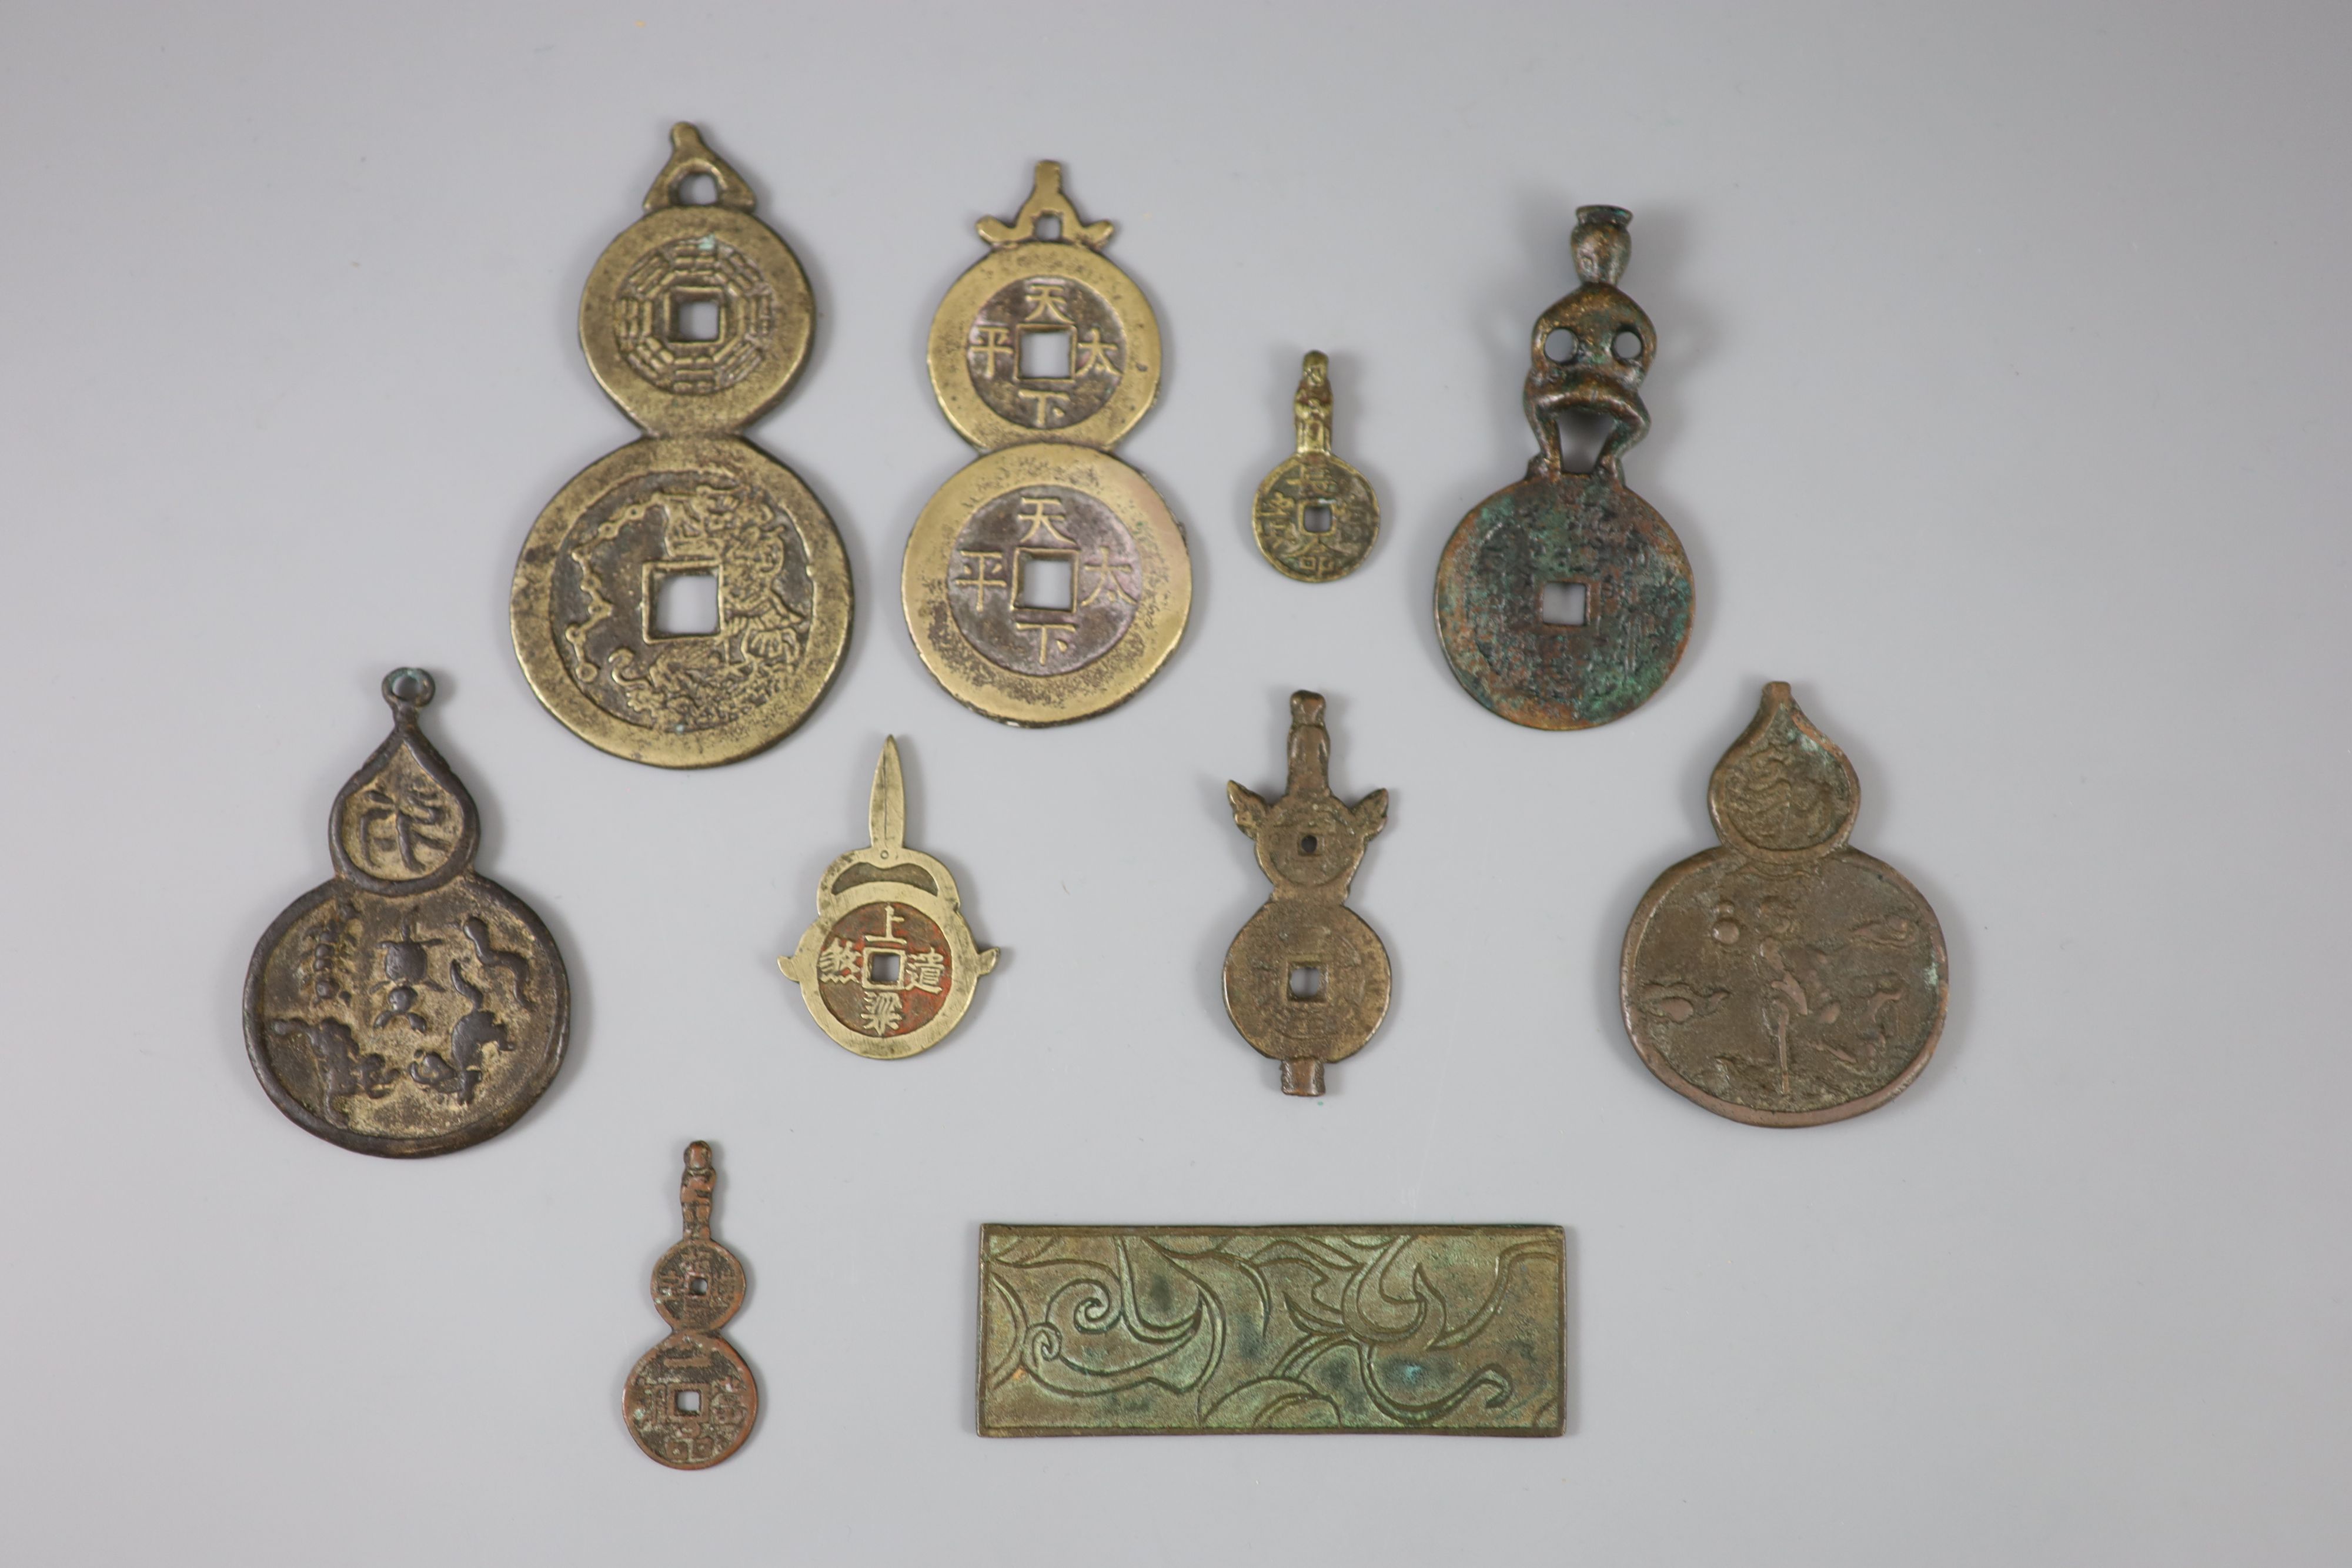 China, 10 bronze charms or amulets, Qing dynasty-Republic period,